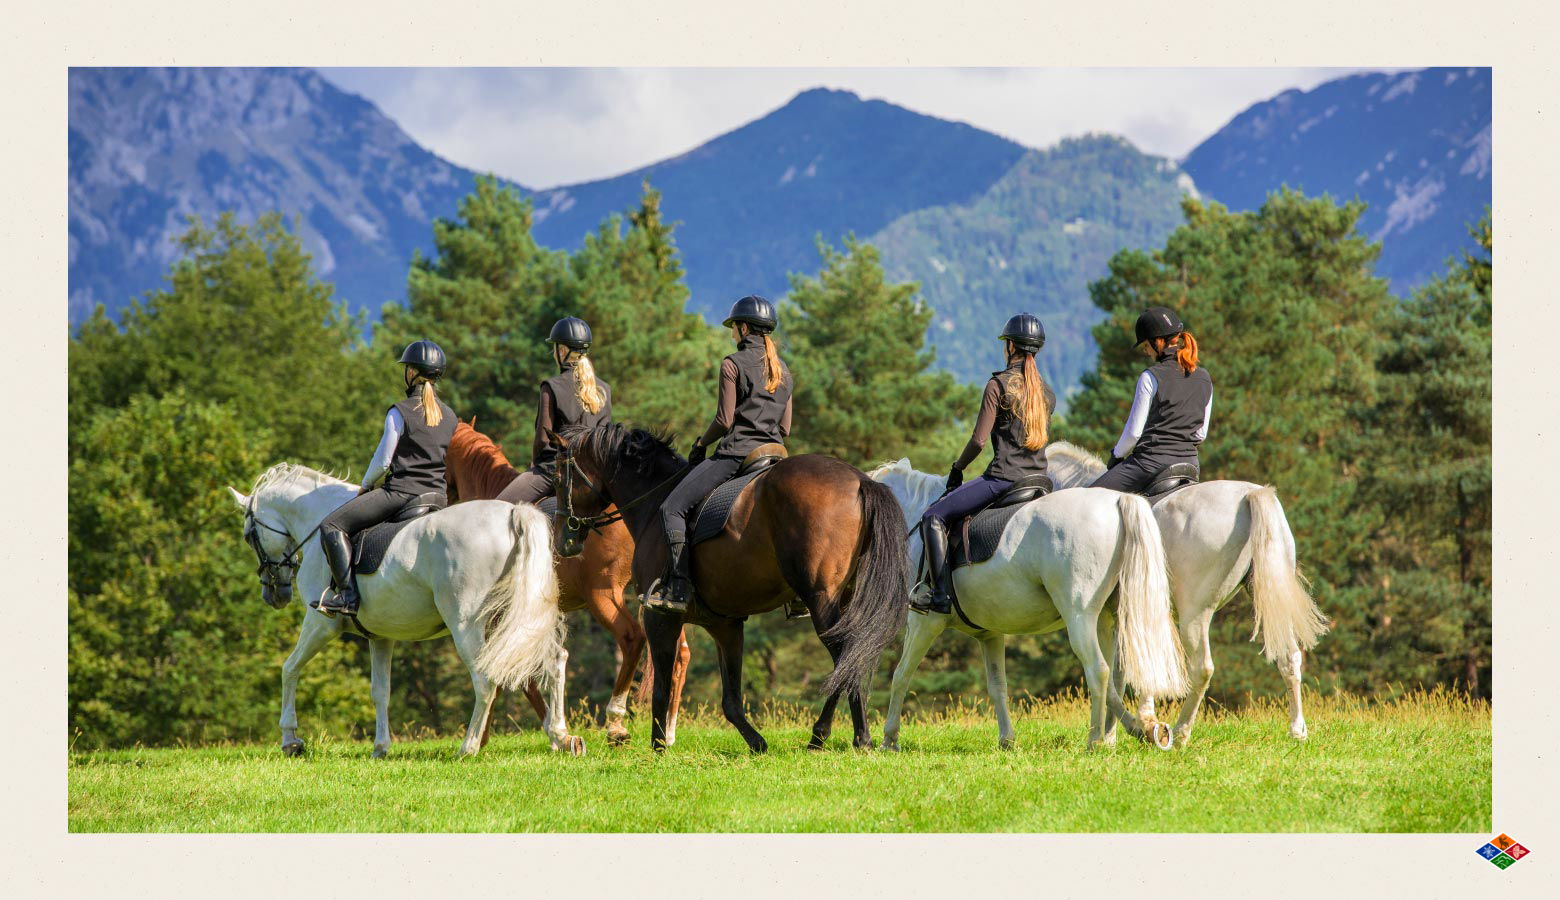 Five people riding horses with the Smoky Mountains in the background